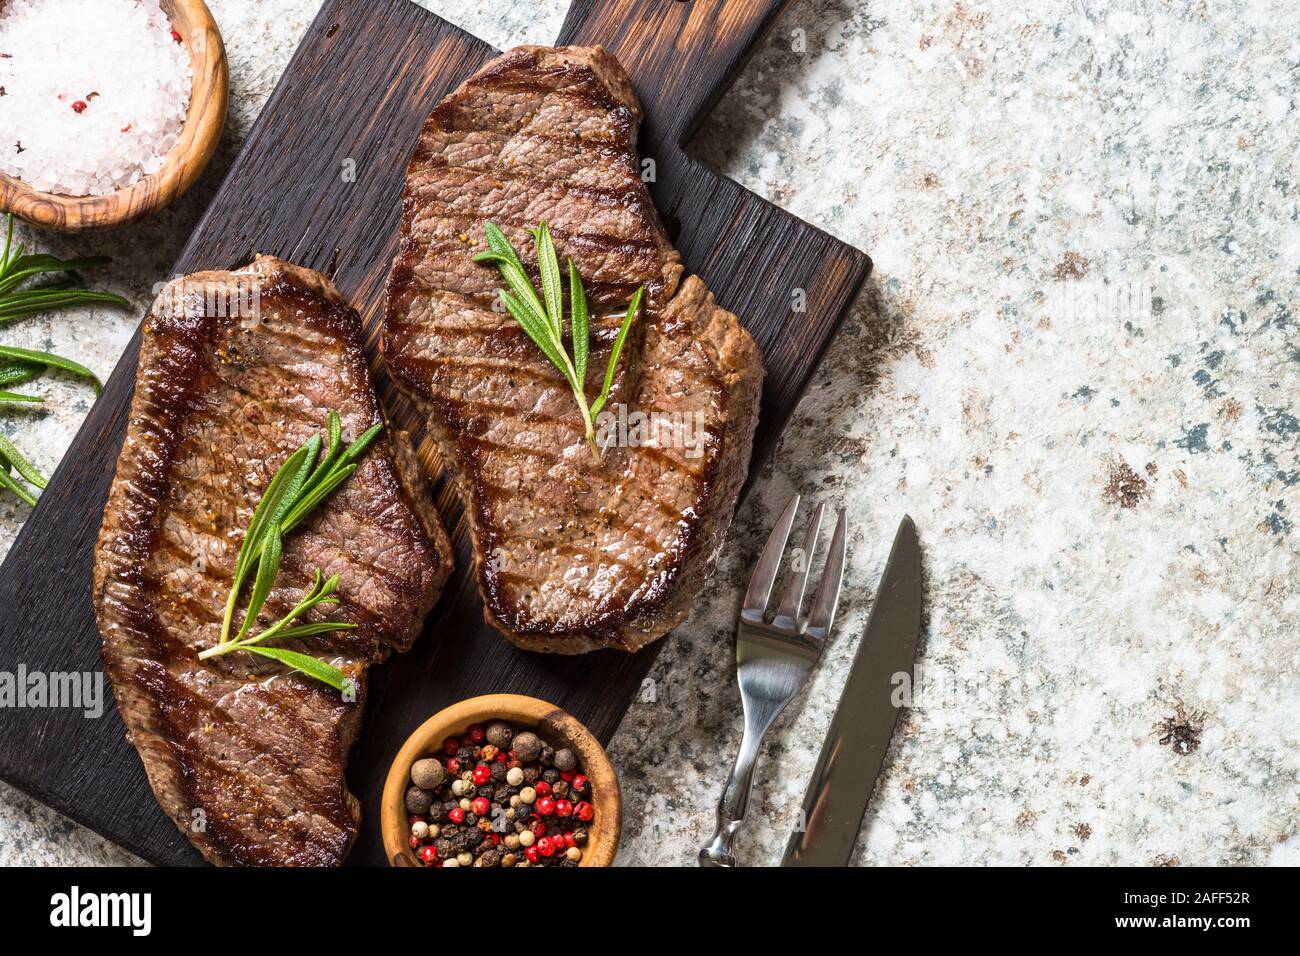 Grilled beef steak on wooden cutting board. Stock Photo